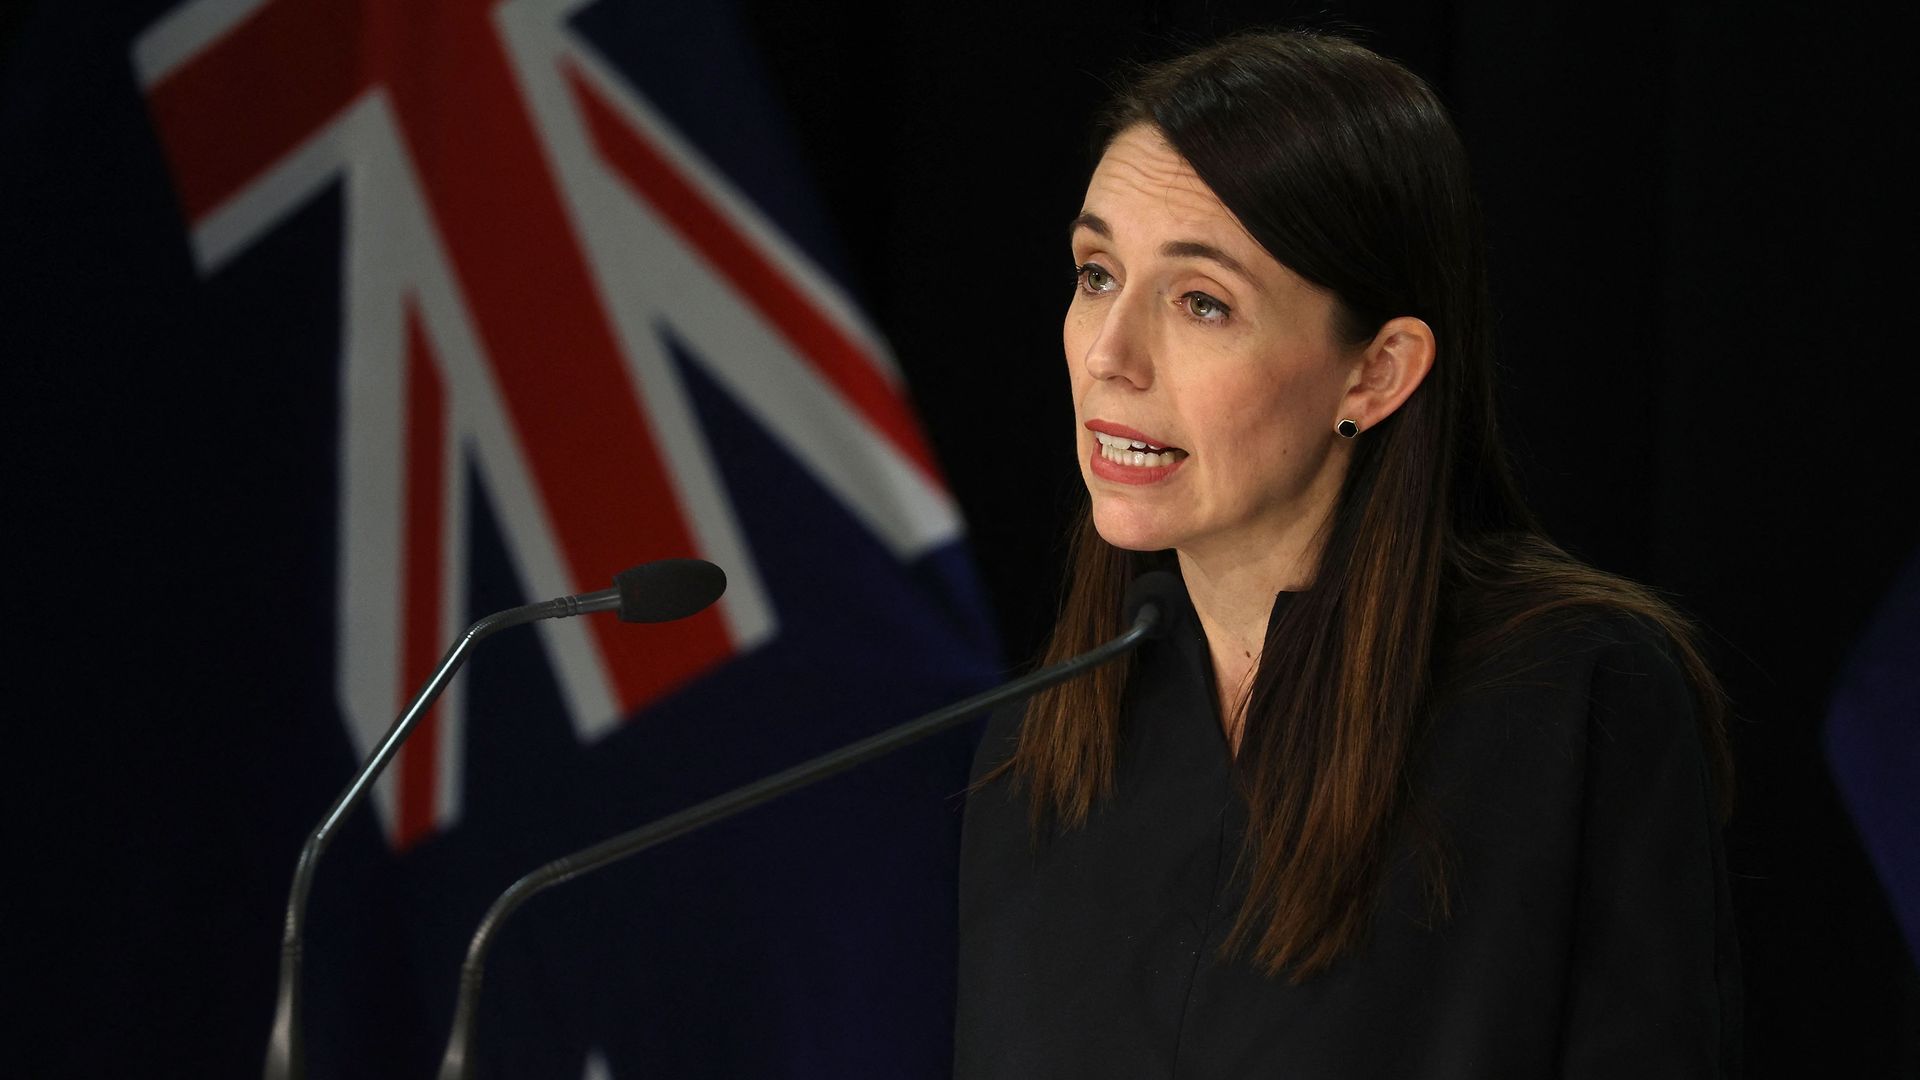 New Zealand's Prime Minister Jacinda Ardern speaks during a press conference at the Parliament in Wellington on September 12.